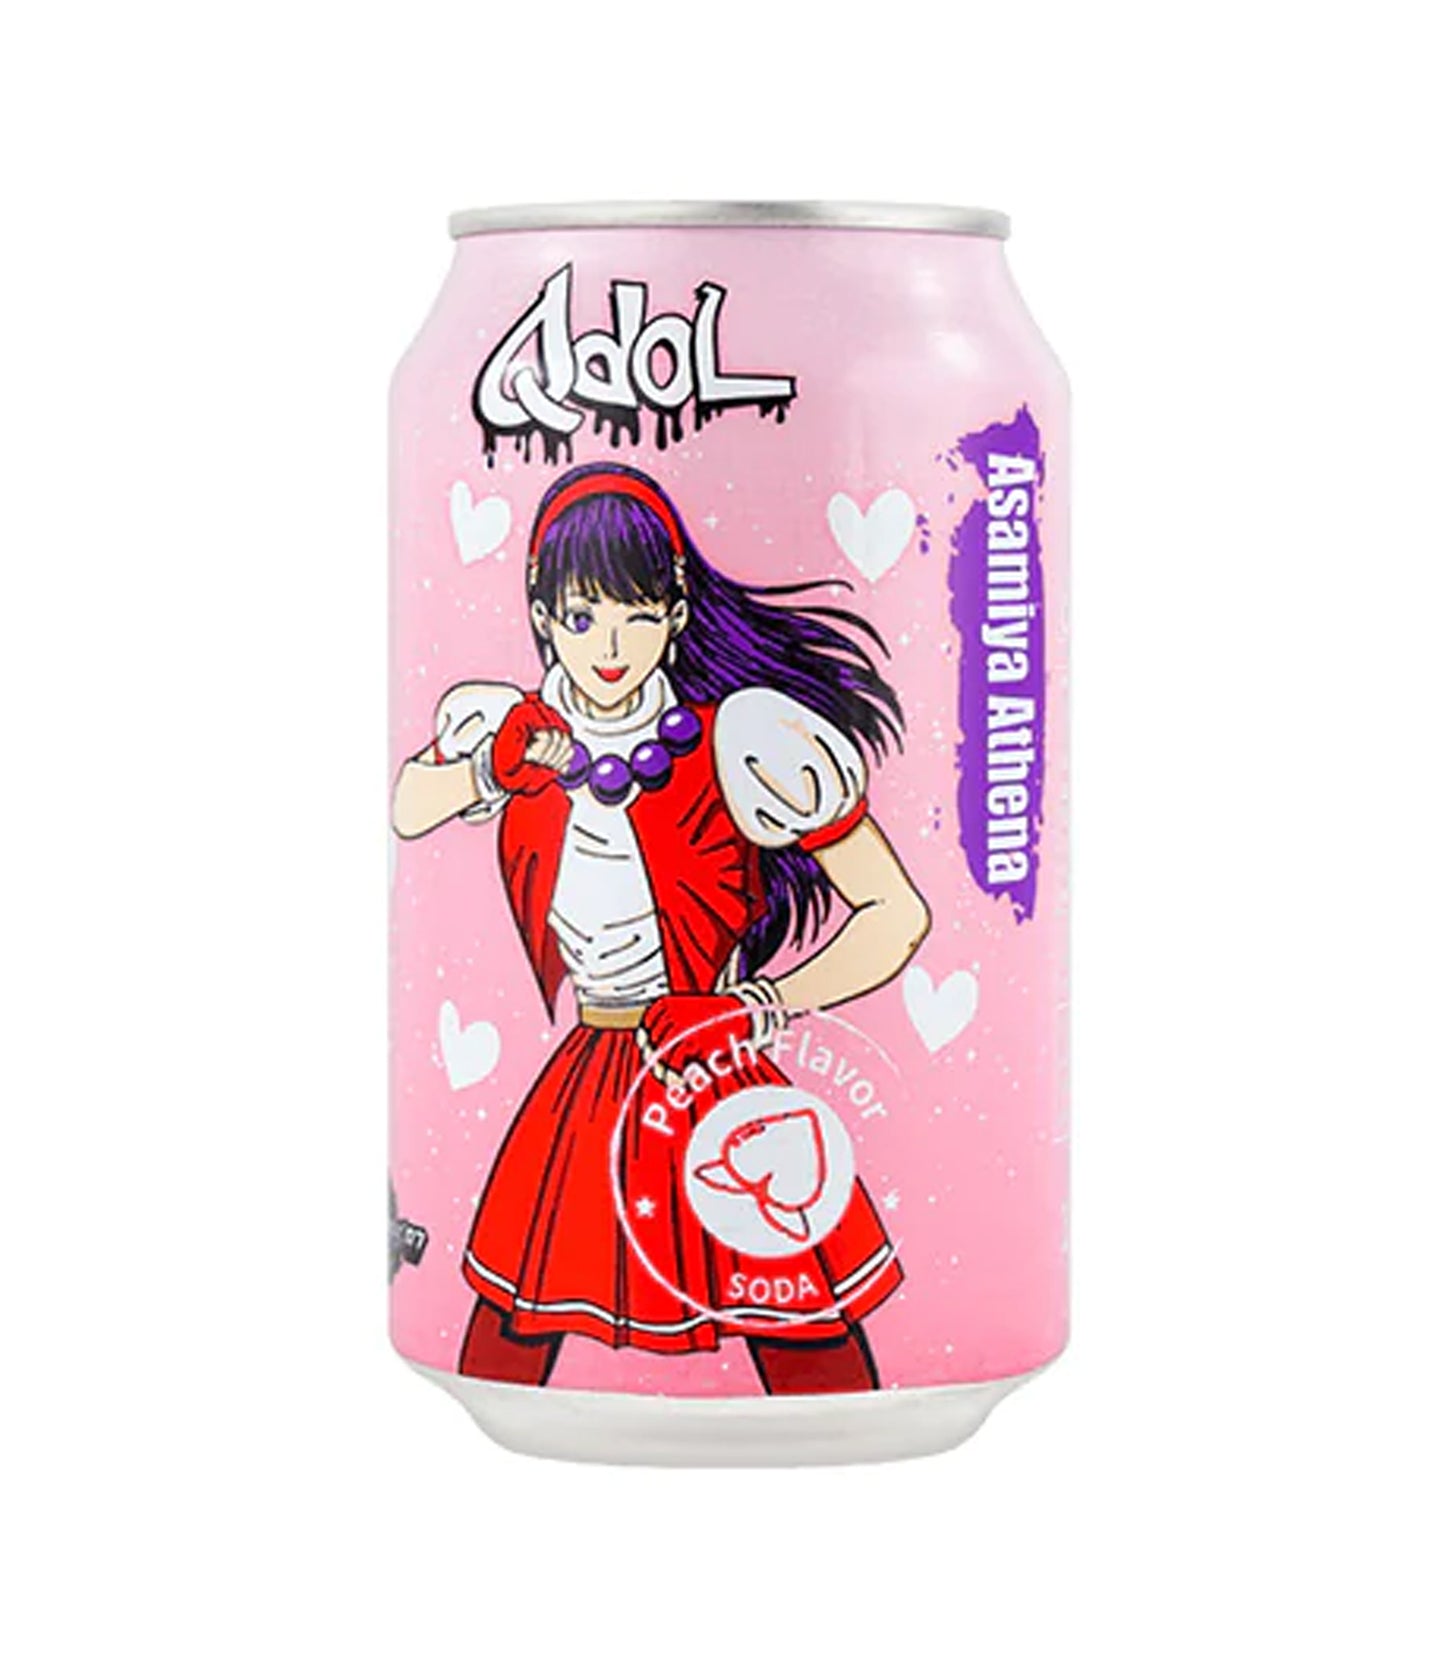 QDOL – The King of Fighters ’97 Soda (Peach Flavour) 330ml